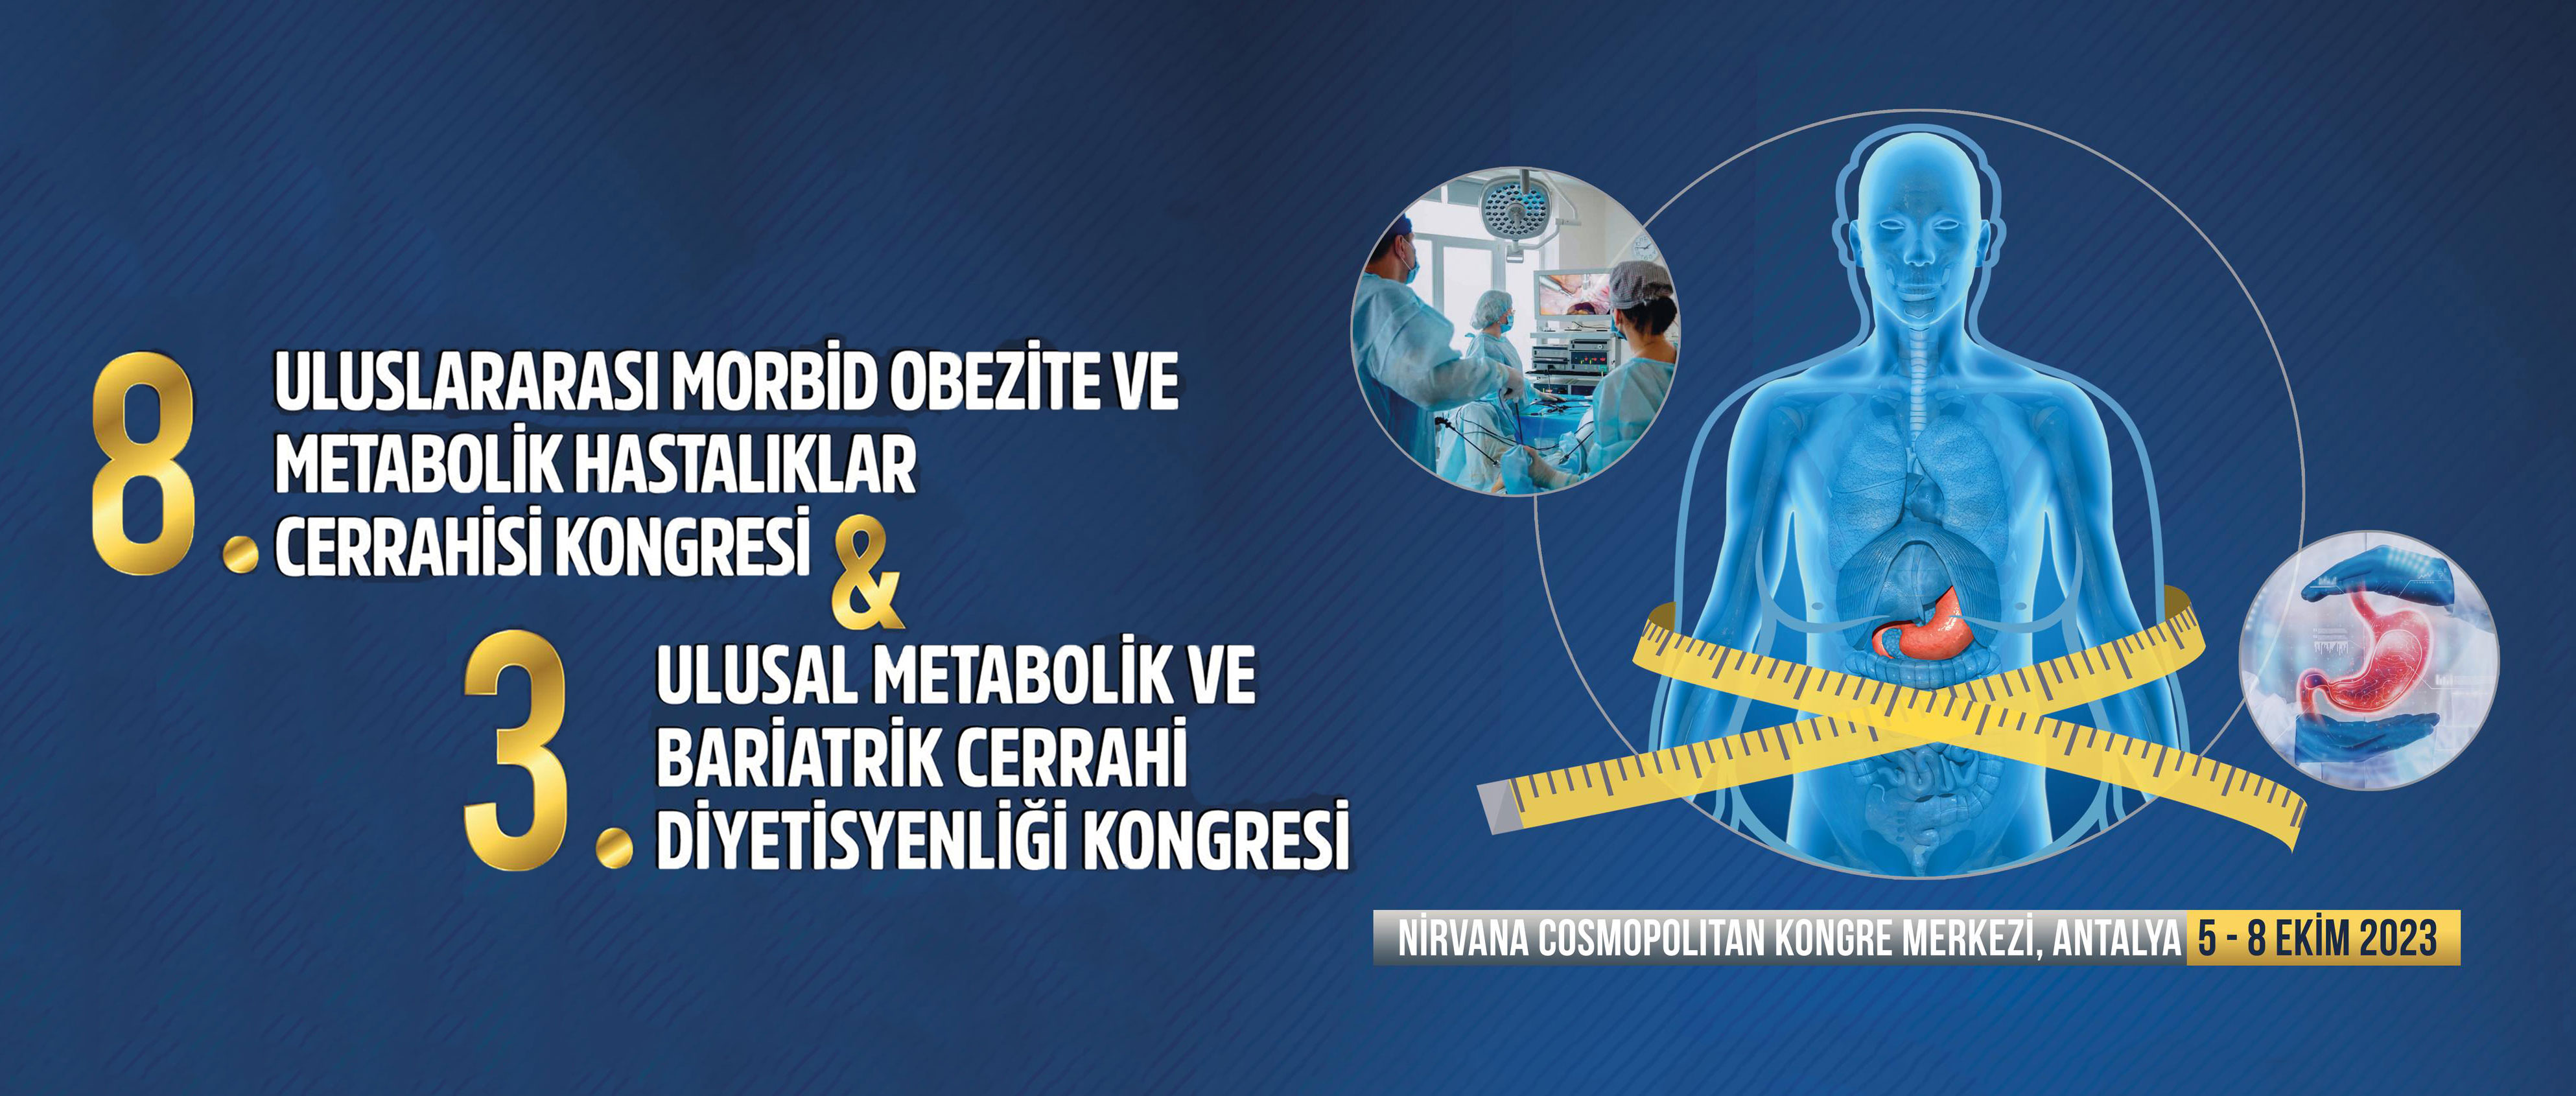 Qianjing Medical made a wonderful appearance at the International Congress of Morbid Obesity and Metabolic Disease Surgery in Turkey